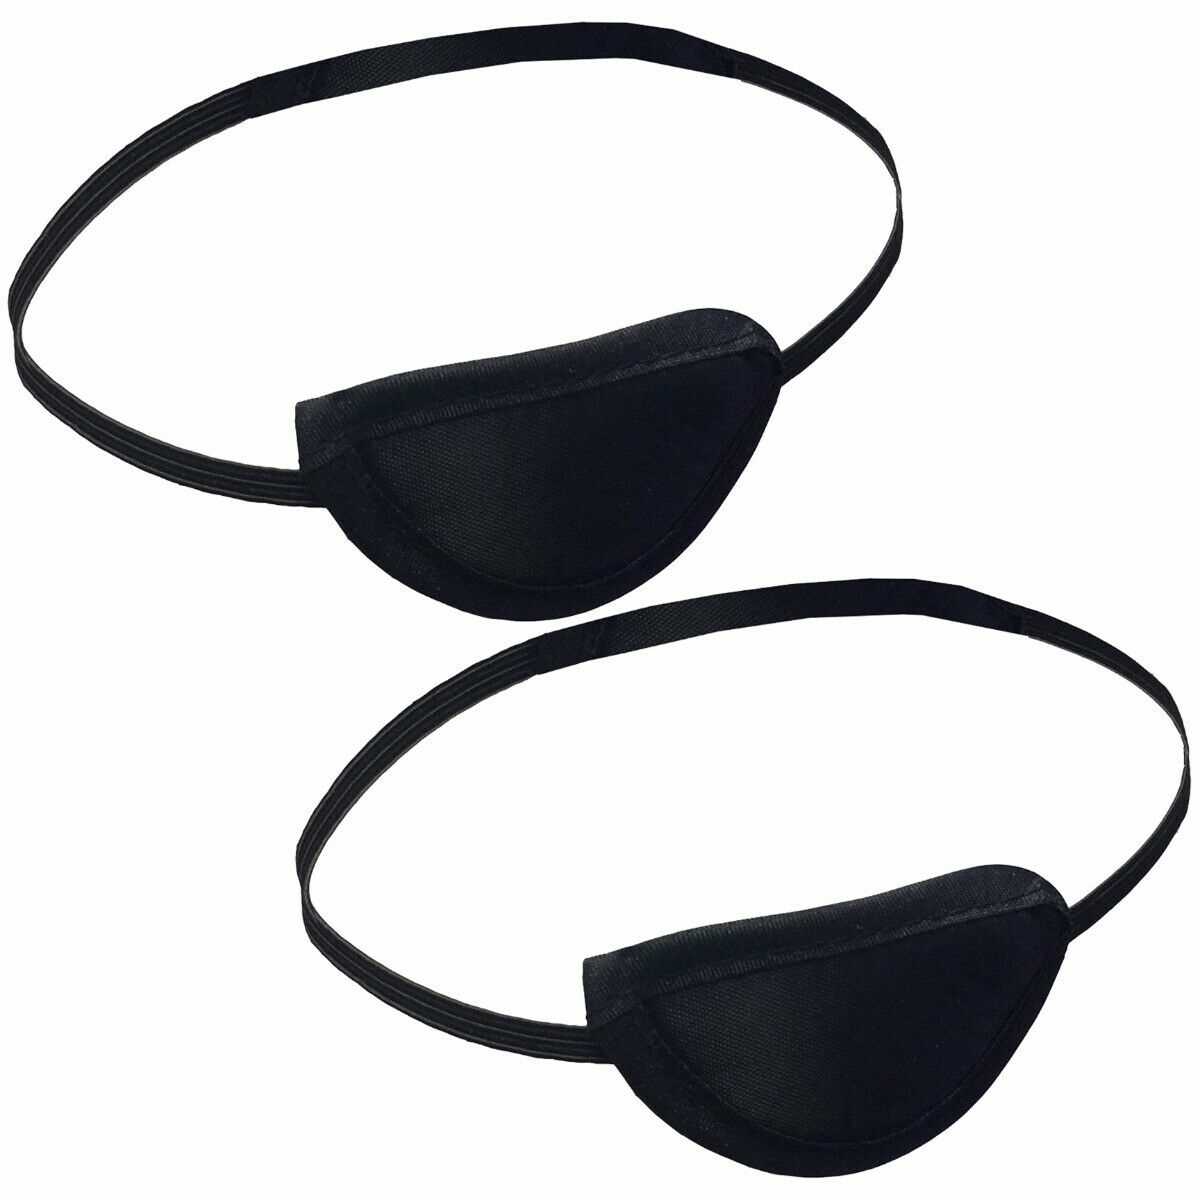 2x Medical Concave Eye Patch Foam Groove Washable Eyeshades For Strap Kids Adults